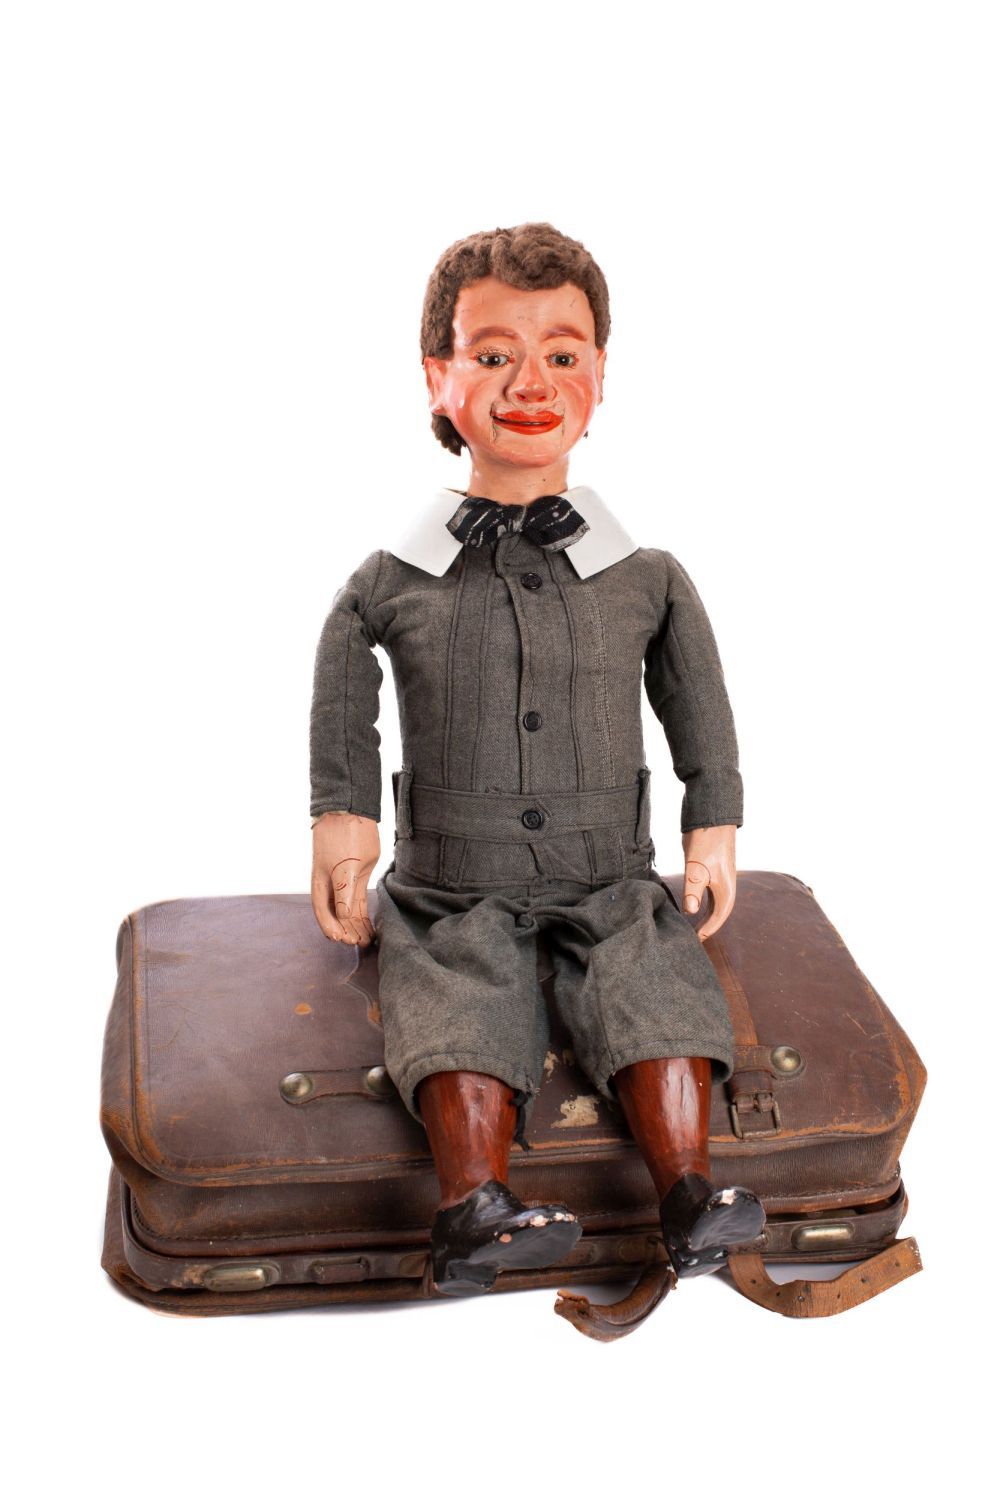 A late 19th/early 20th century ventriloquial 'dummy' figure of a young boy: the painted mache head